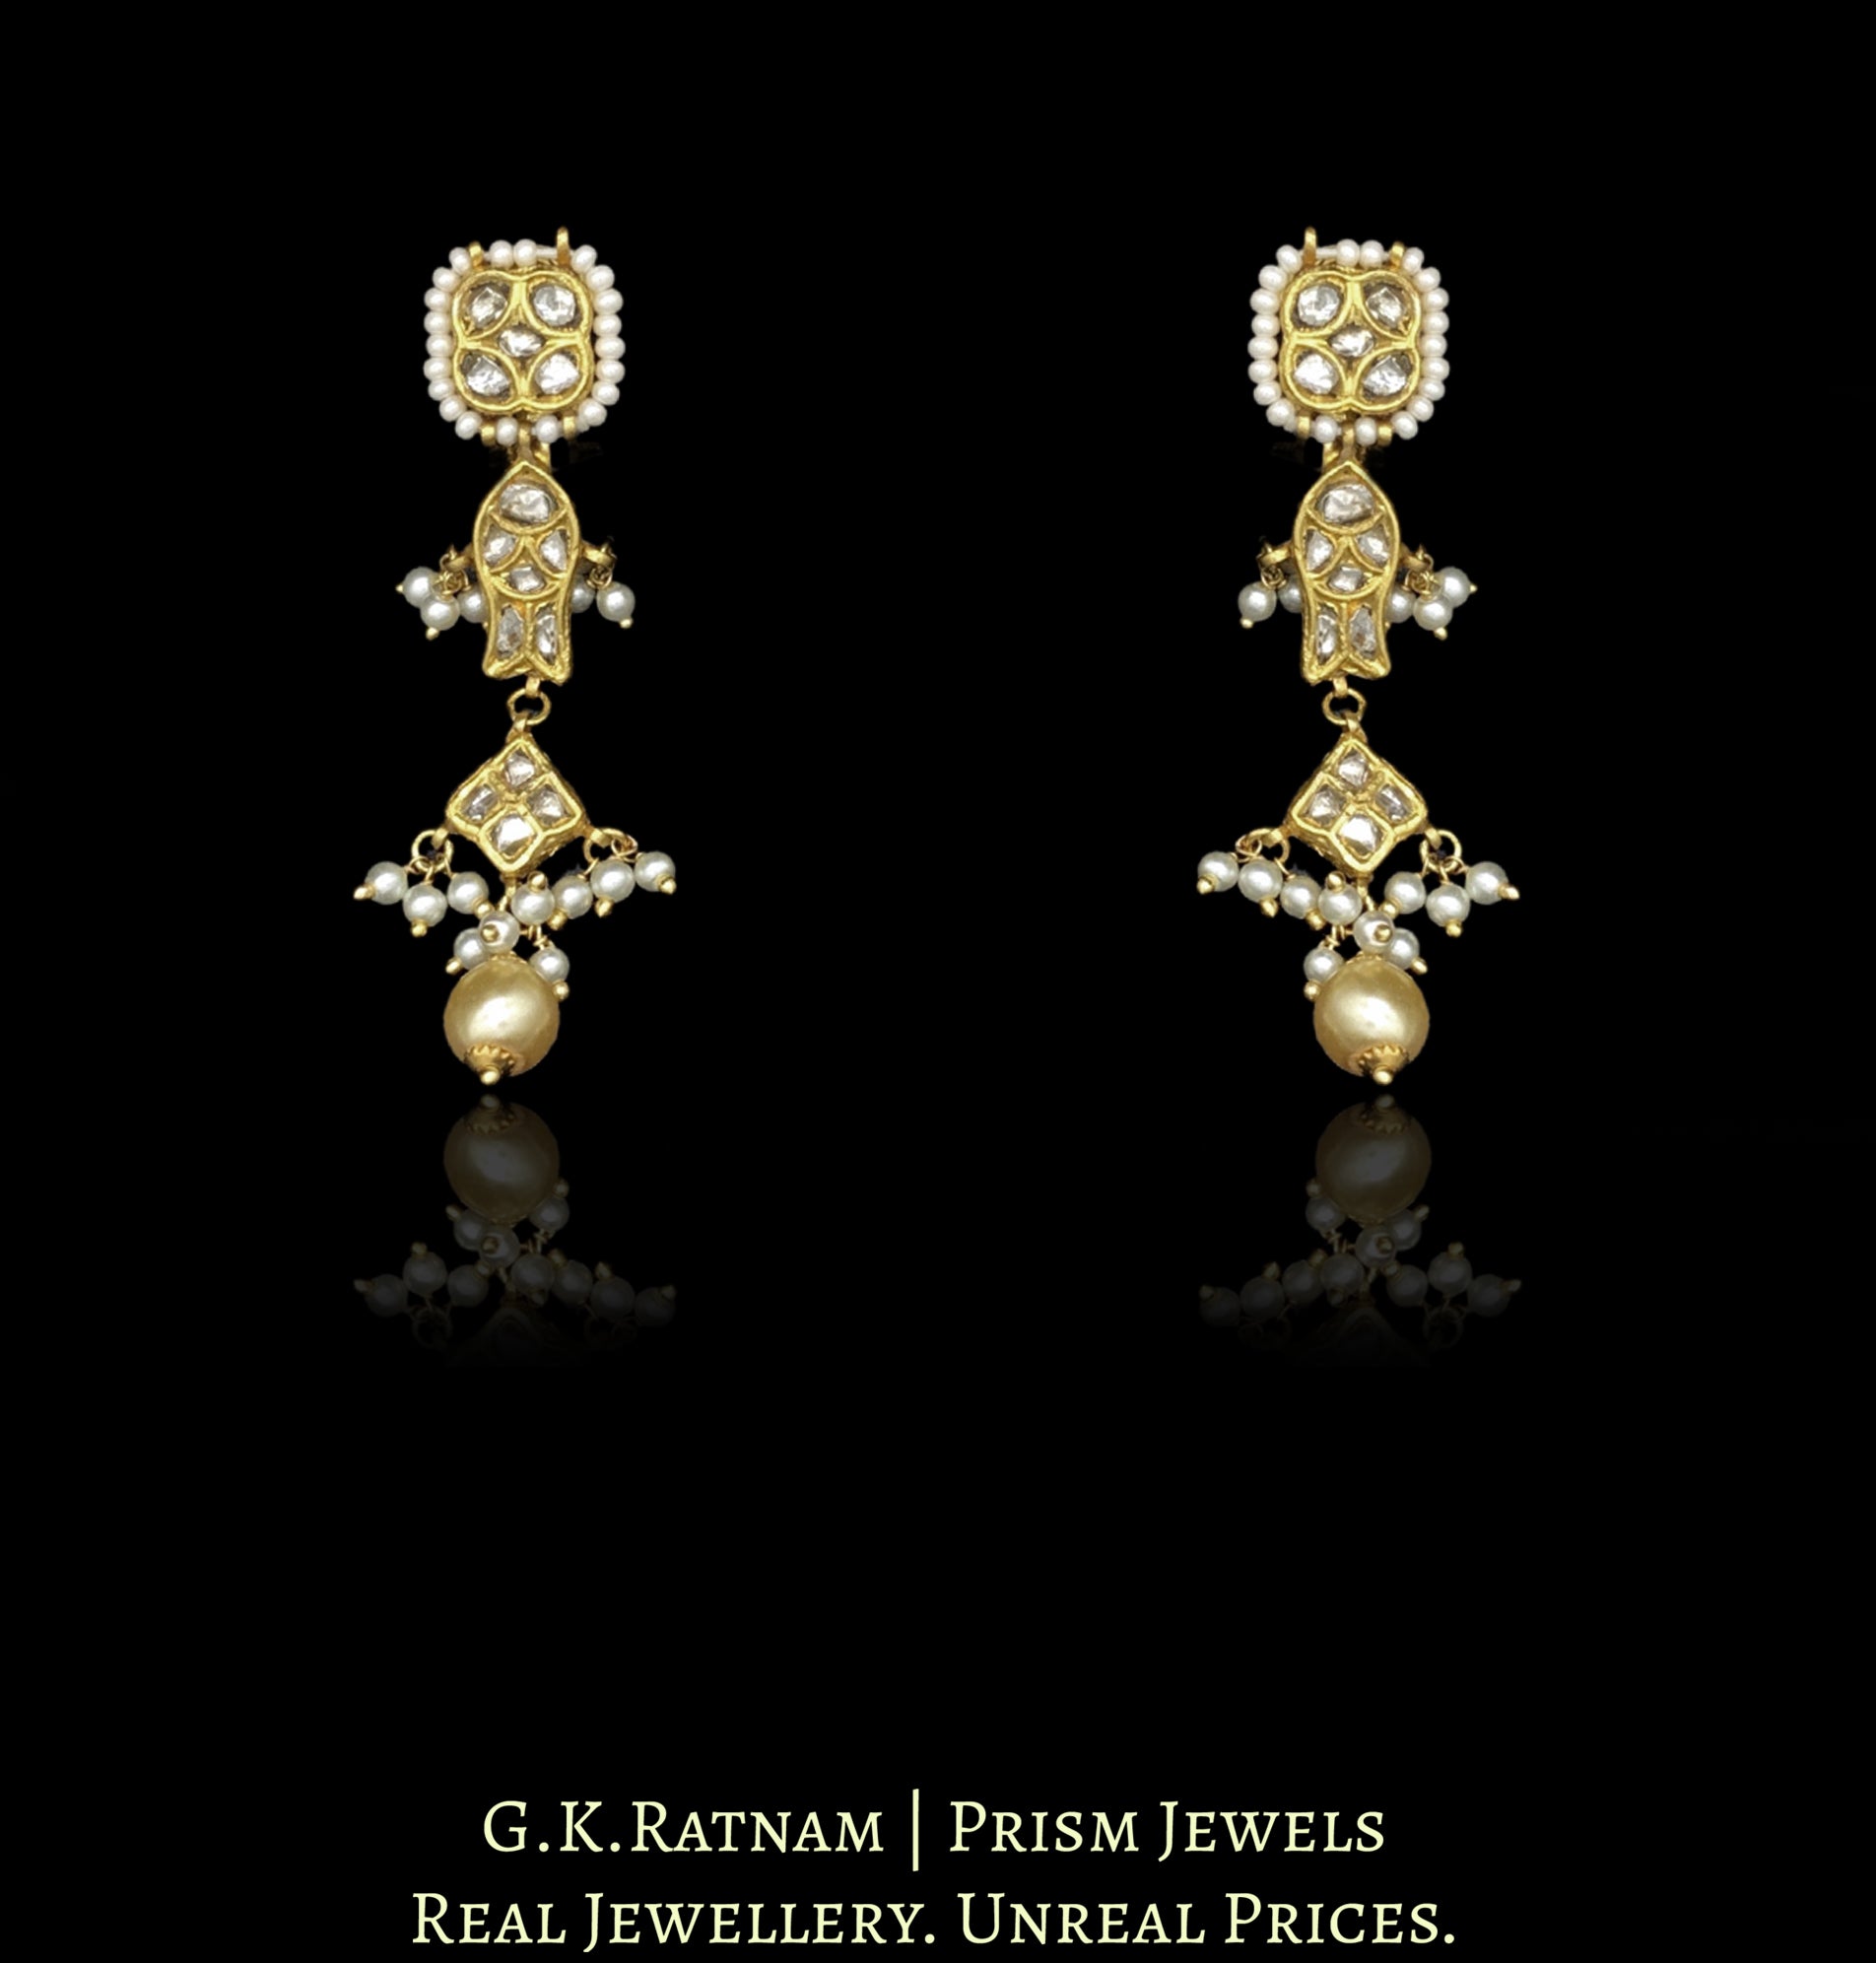 23k Gold and Diamond Polki Necklace Set with Fishes and emerald-green Melons